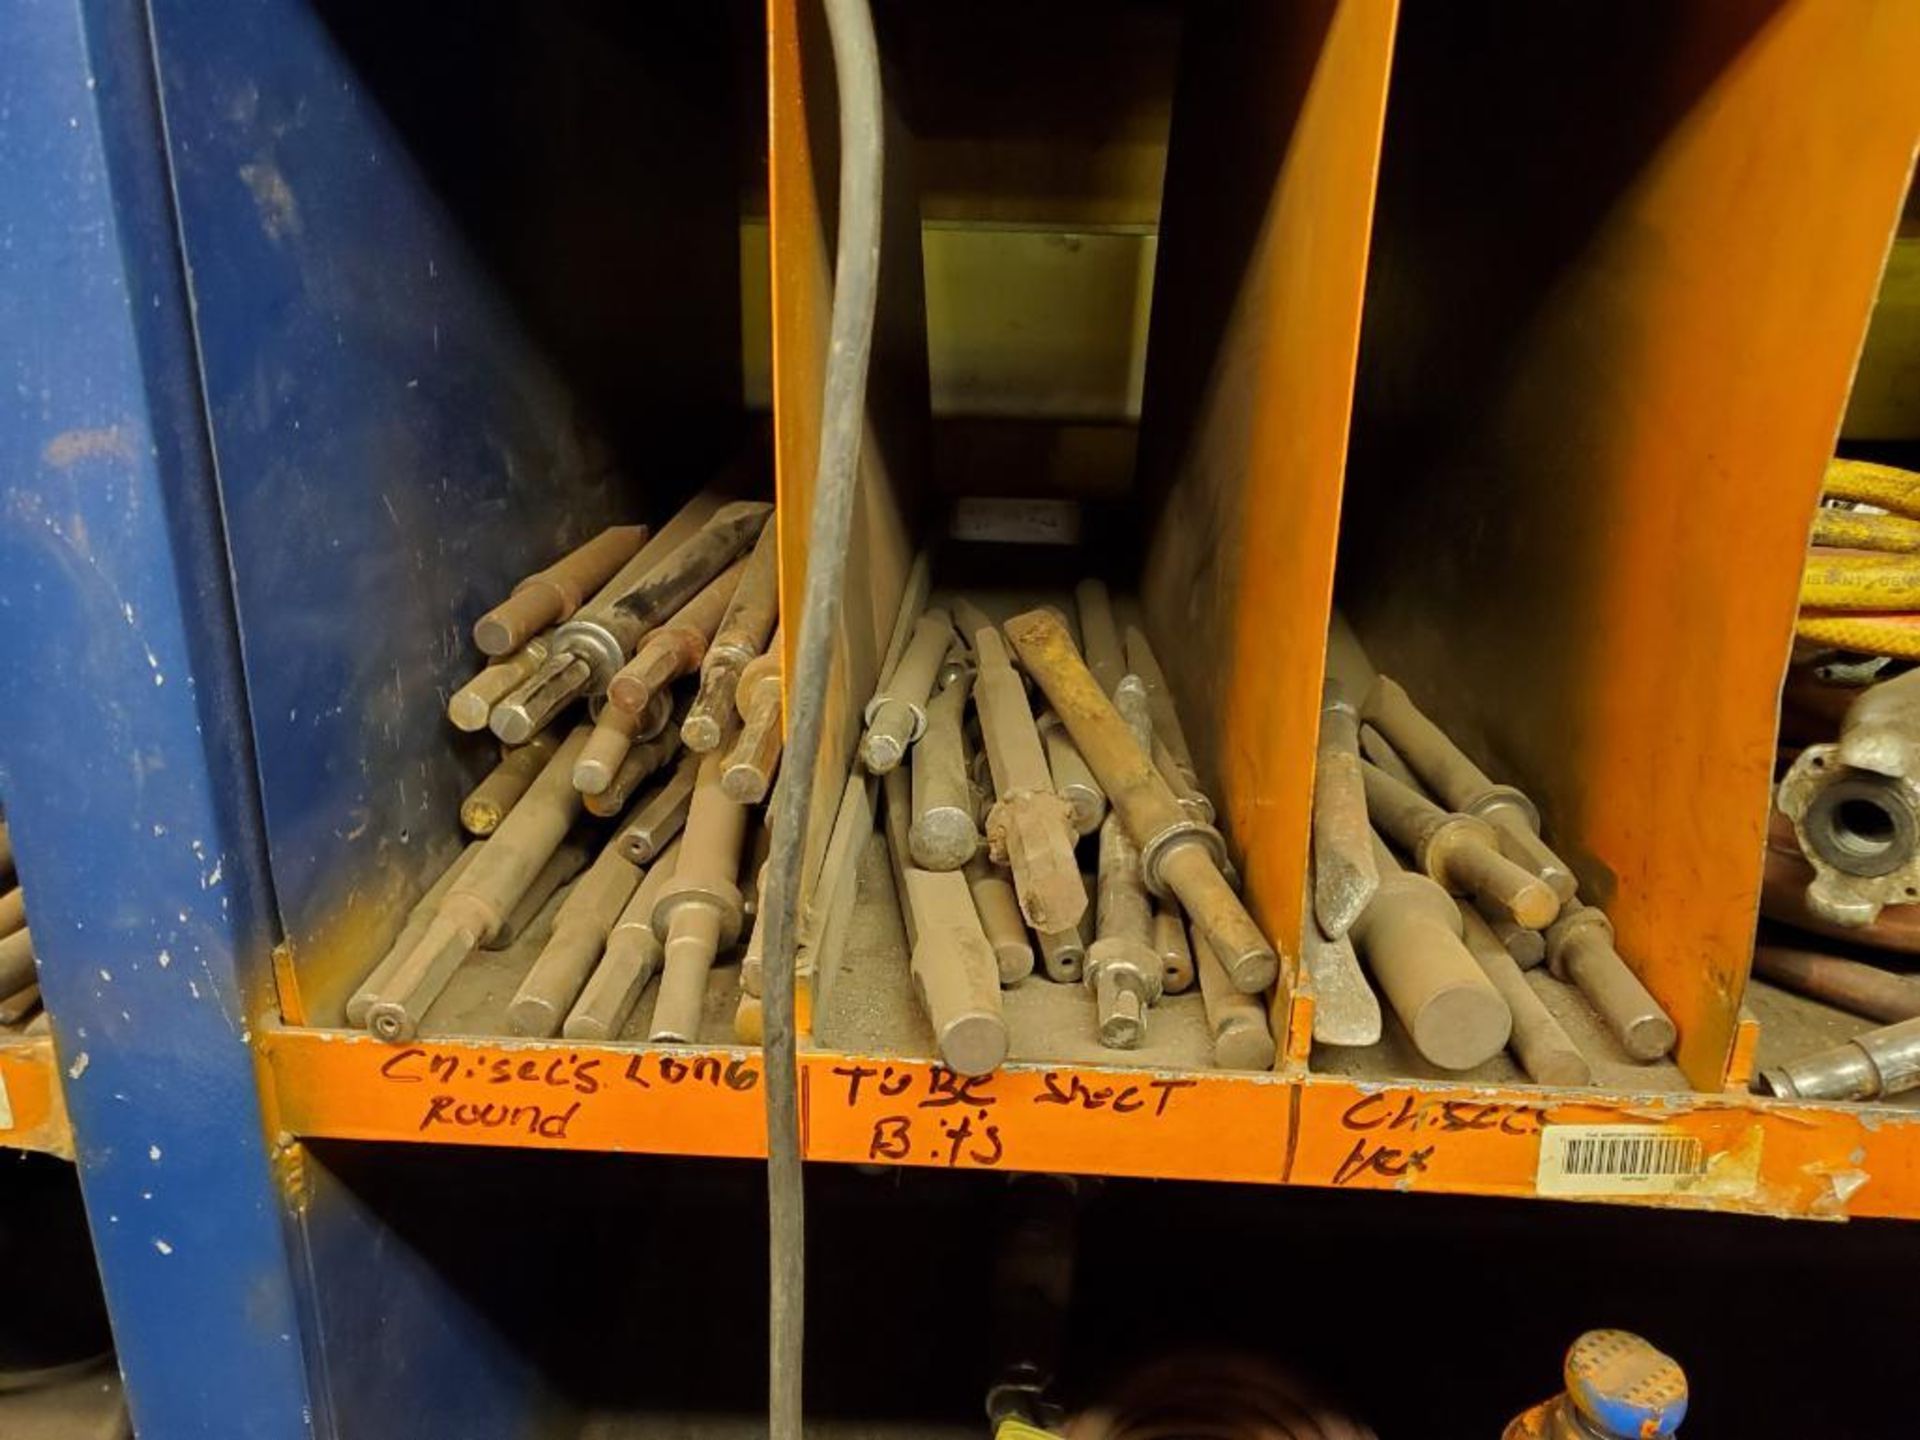 CONTENTS OF SHELVING UNIT, METABO GRINDERS, MILWAUKEE DEEP CUT BAND SAWS, PNEUMATIC METAL CUTTING SA - Image 17 of 18